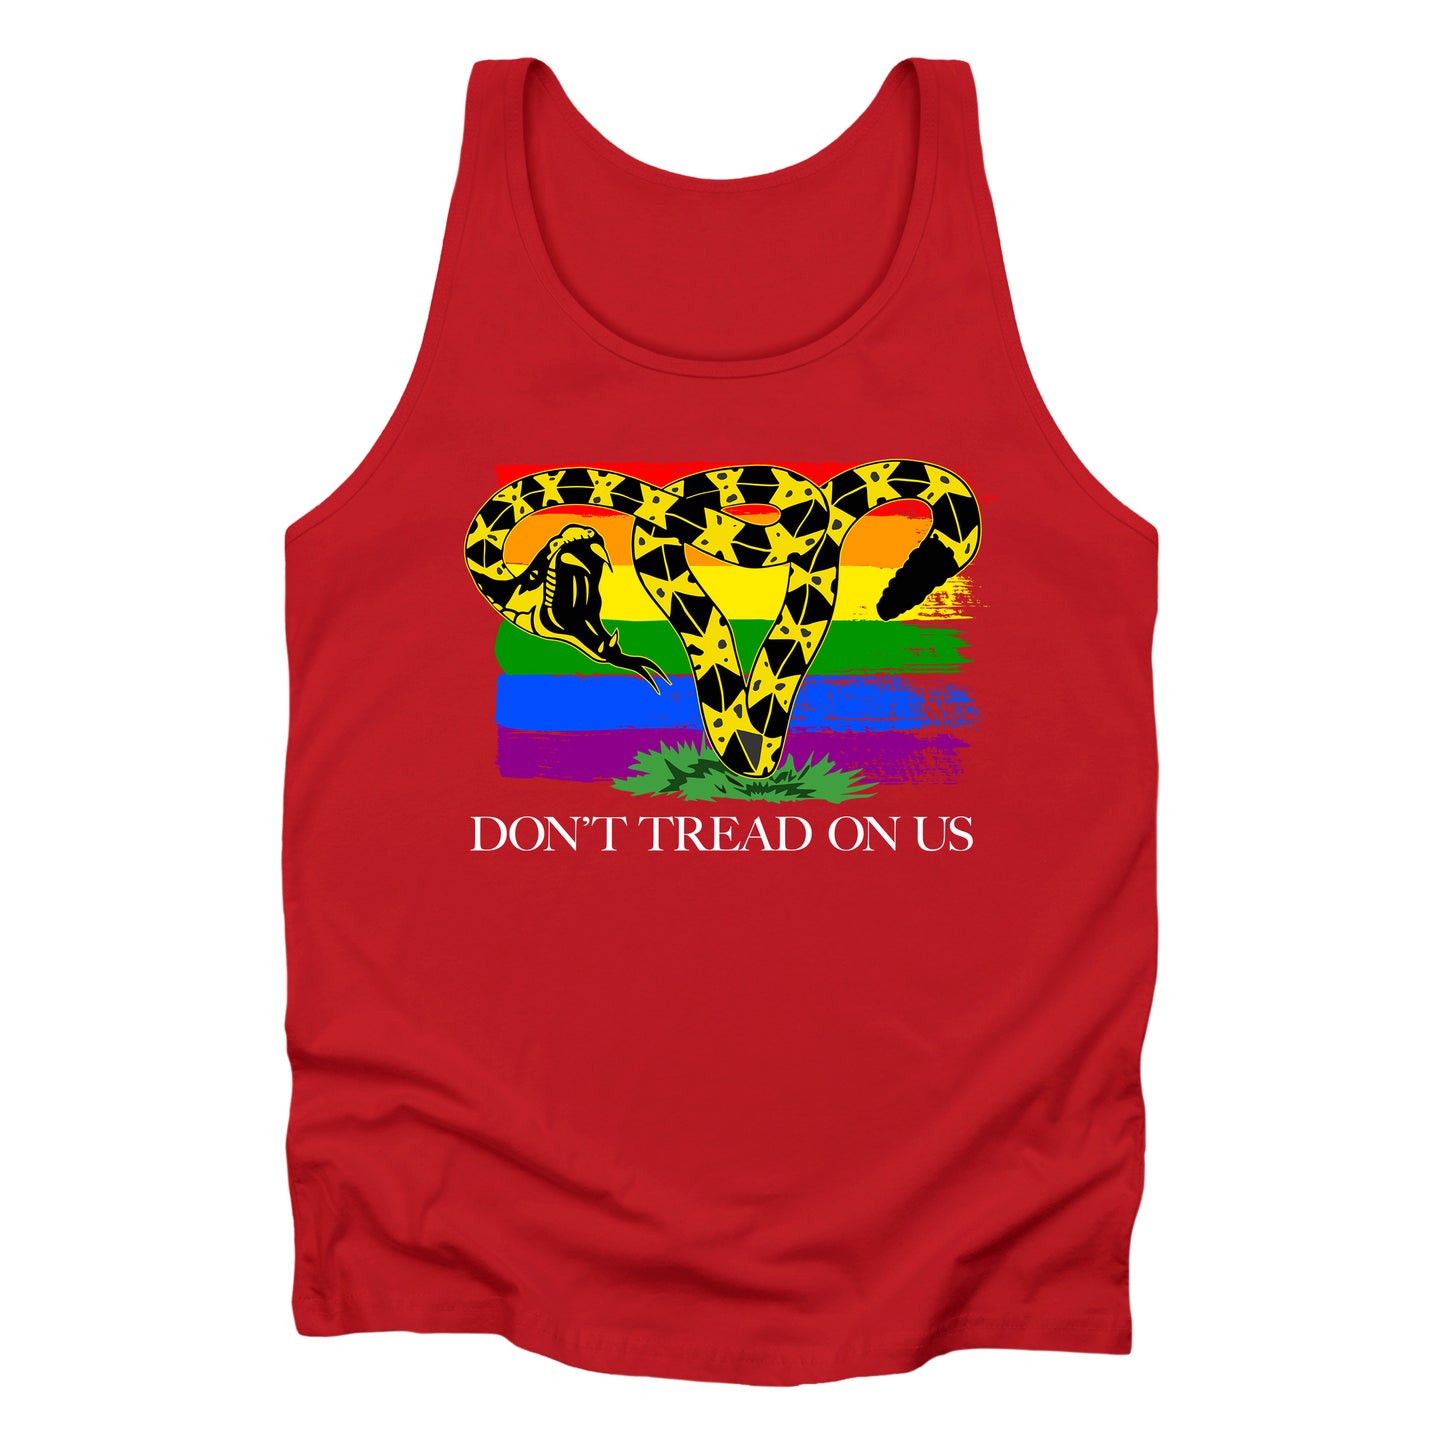 Red color unisex tank top with the “Don’t tread on me” snake redrawn into the shape of a uterus. A rainbow flag is painted in the background. Underneath the image reads “Don’t tread on us” in all caps.